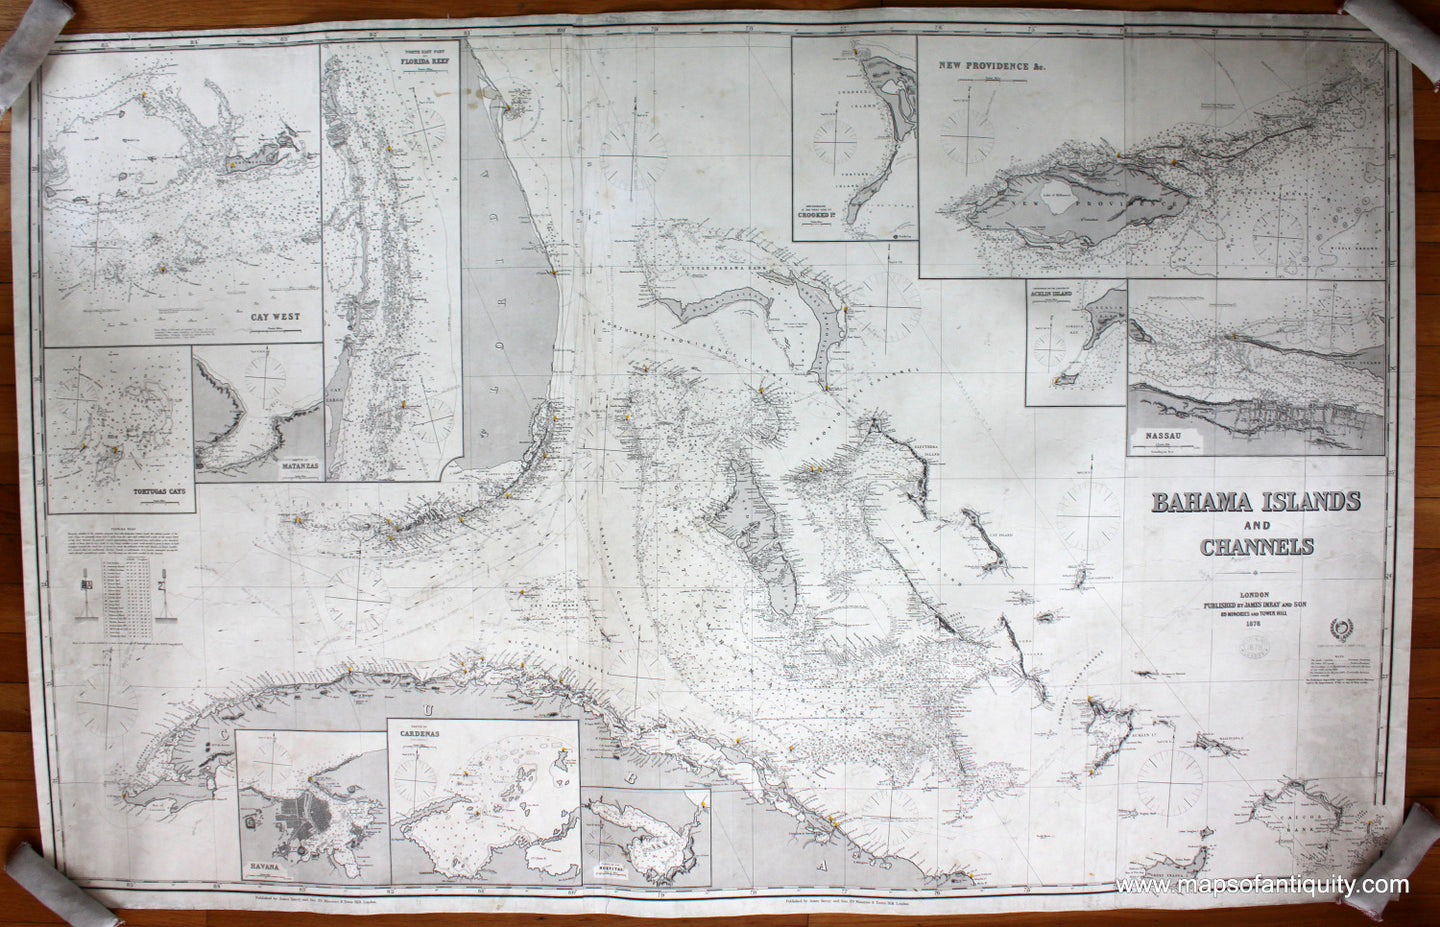 Antique--Nautical-Chart-Bahama-Islands-&-Channels-**********-Central-America-and-Caribbean--1878-Imray-Maps-Of-Antiquity